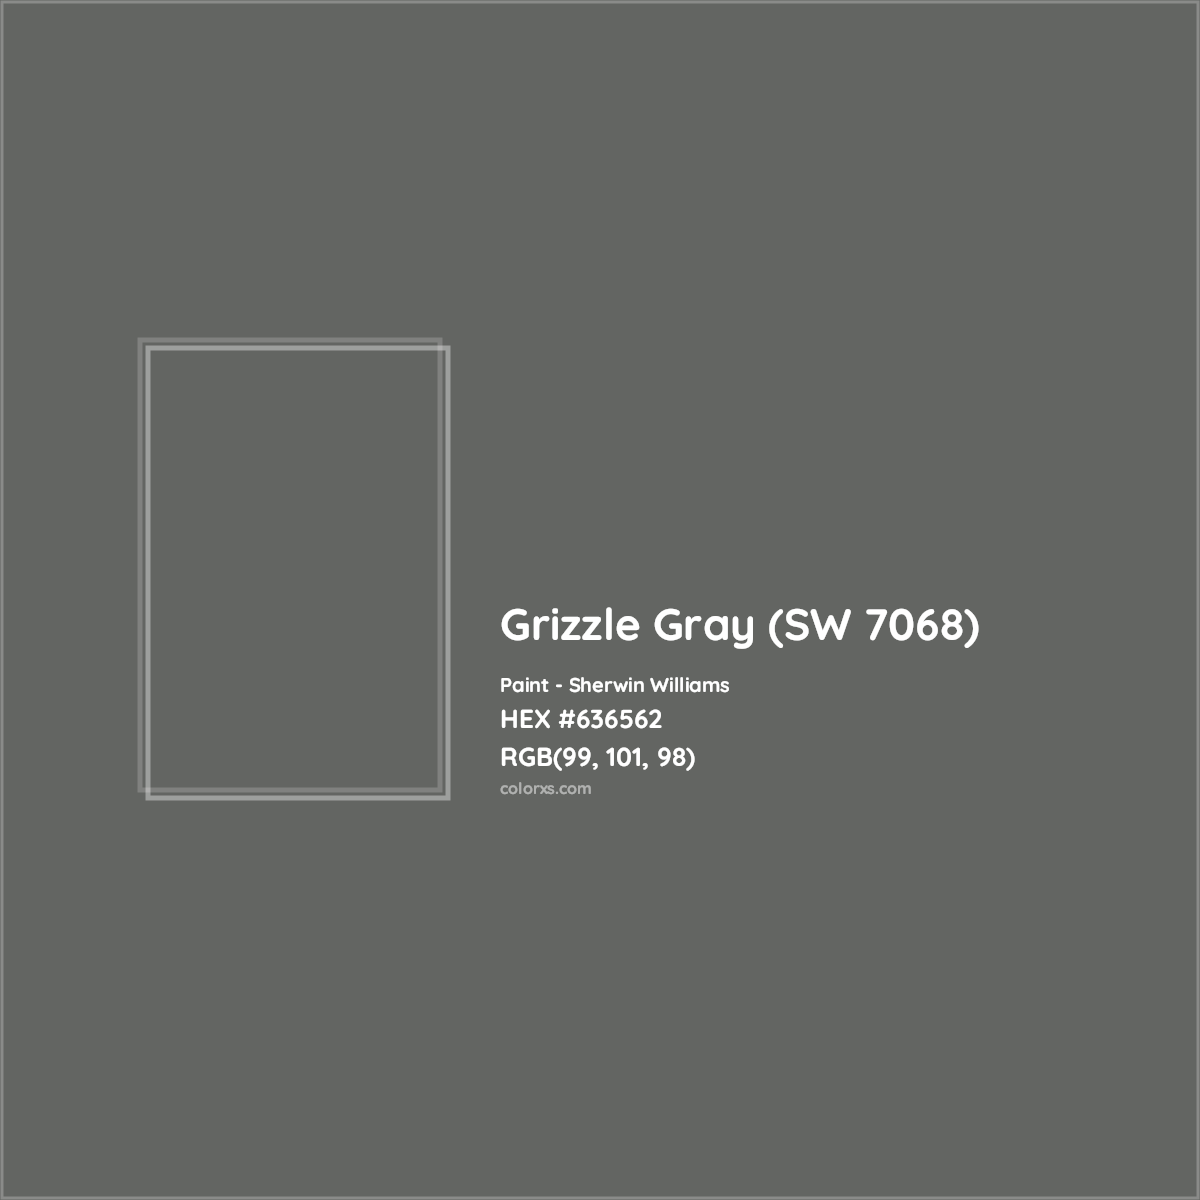 HEX #636562 Grizzle Gray (SW 7068) Paint Sherwin Williams - Color Code